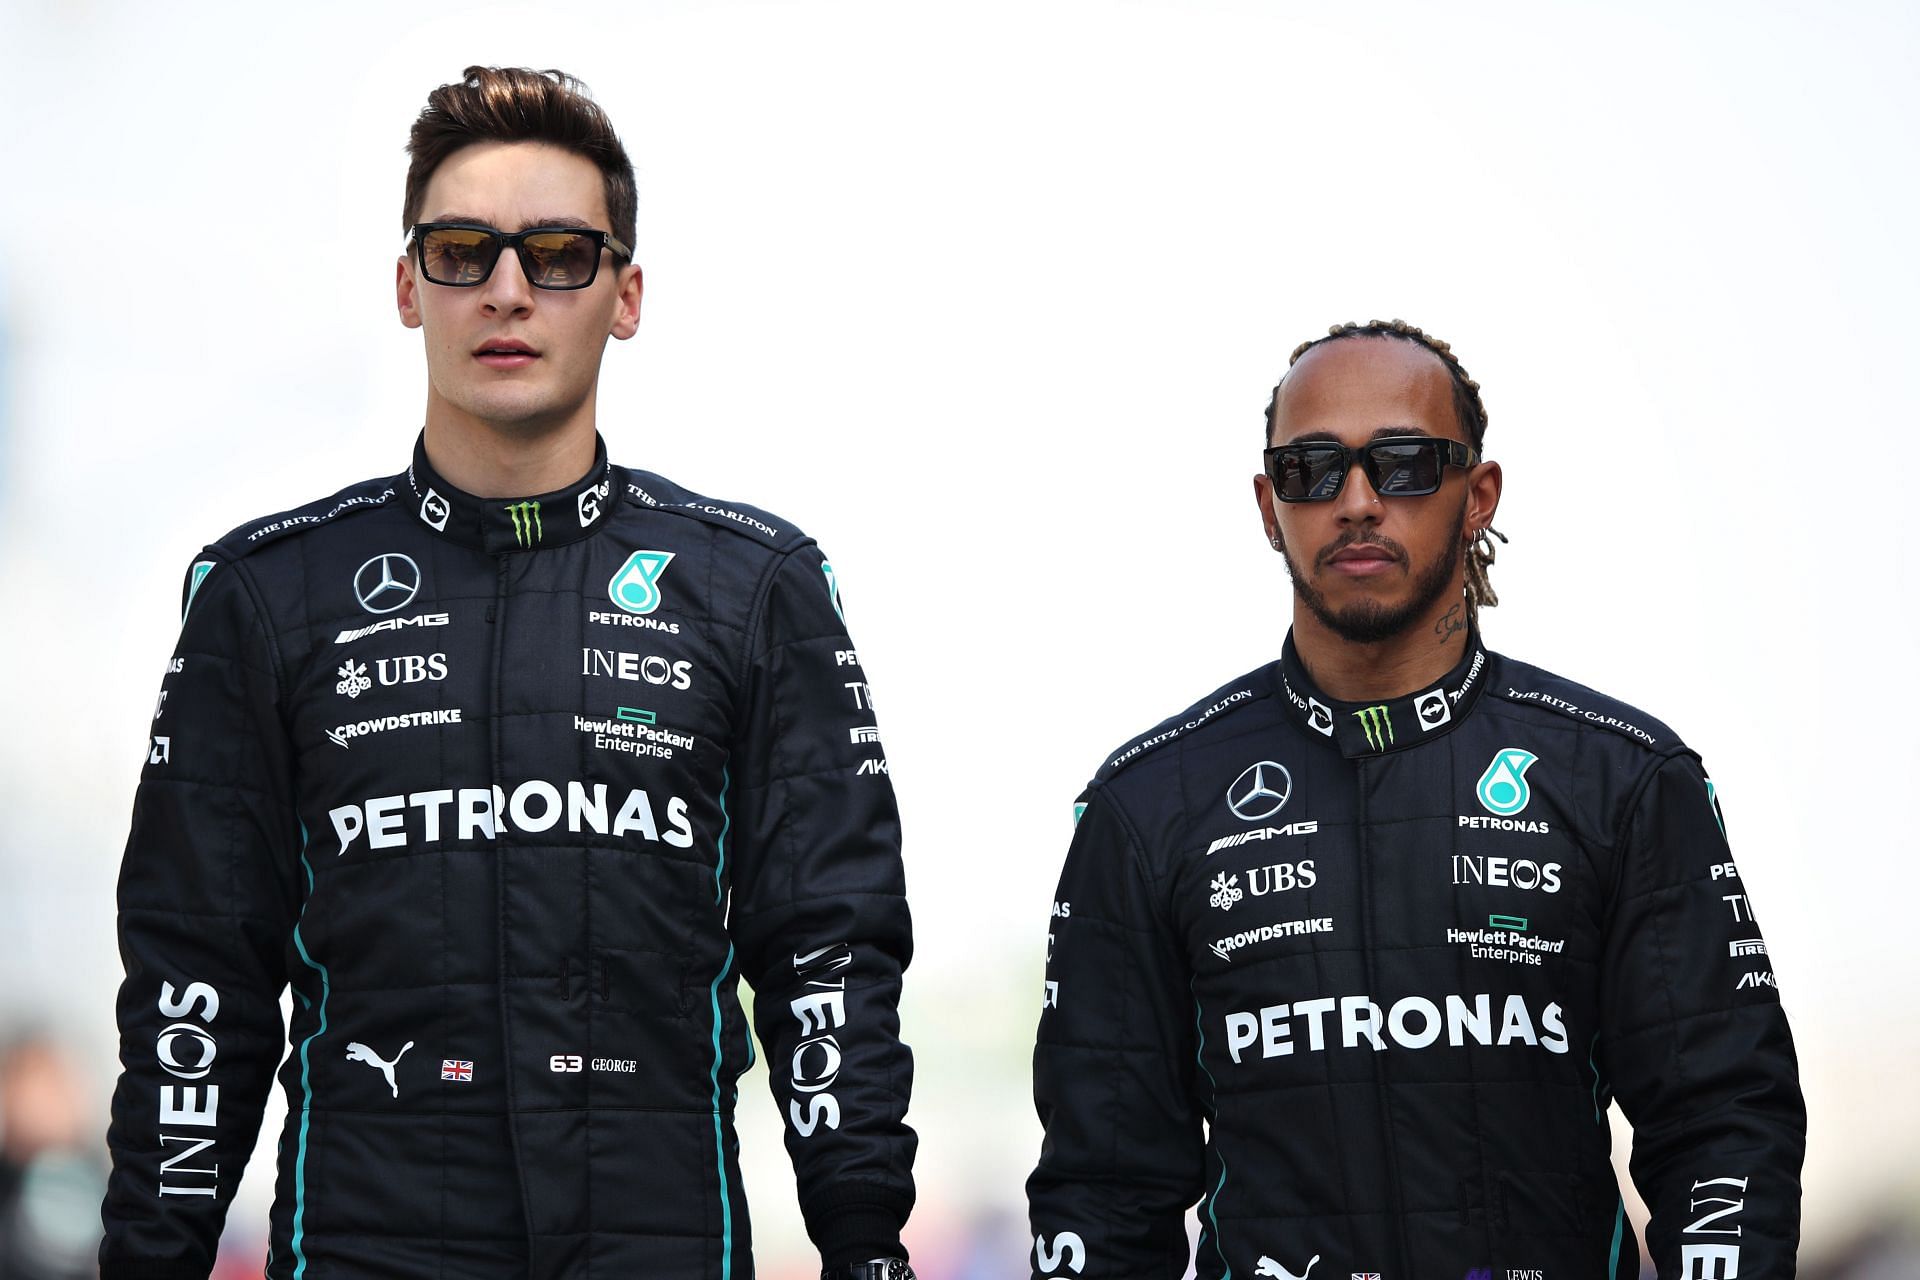 George Russell (left) with Lewis Hamilton during Formula 1 Testing in Bahrain - Day 1